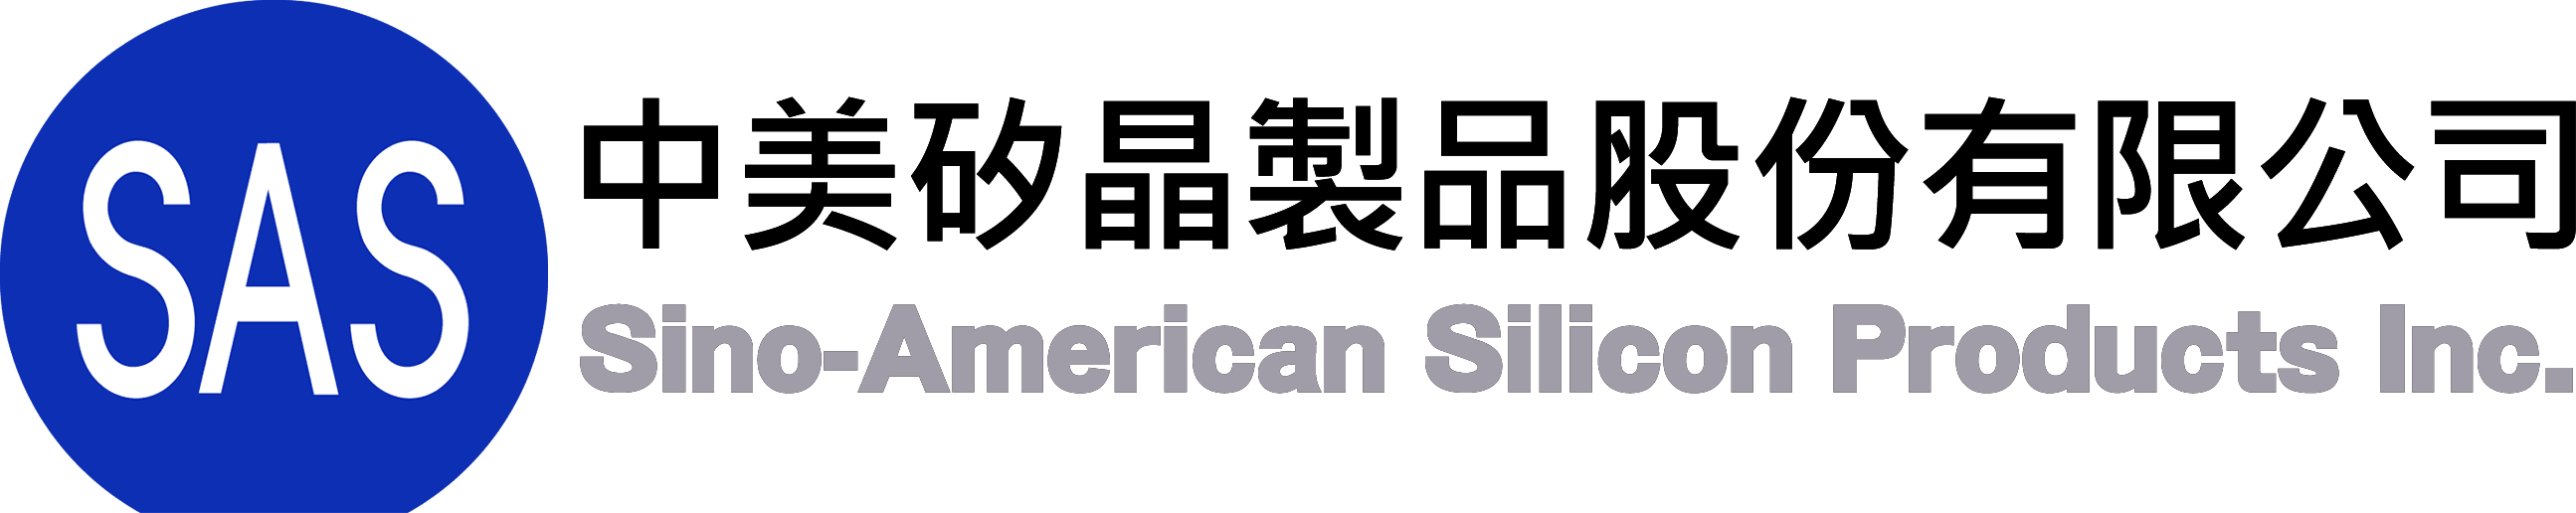 Sino-American Silicon Products logo large (transparent PNG)